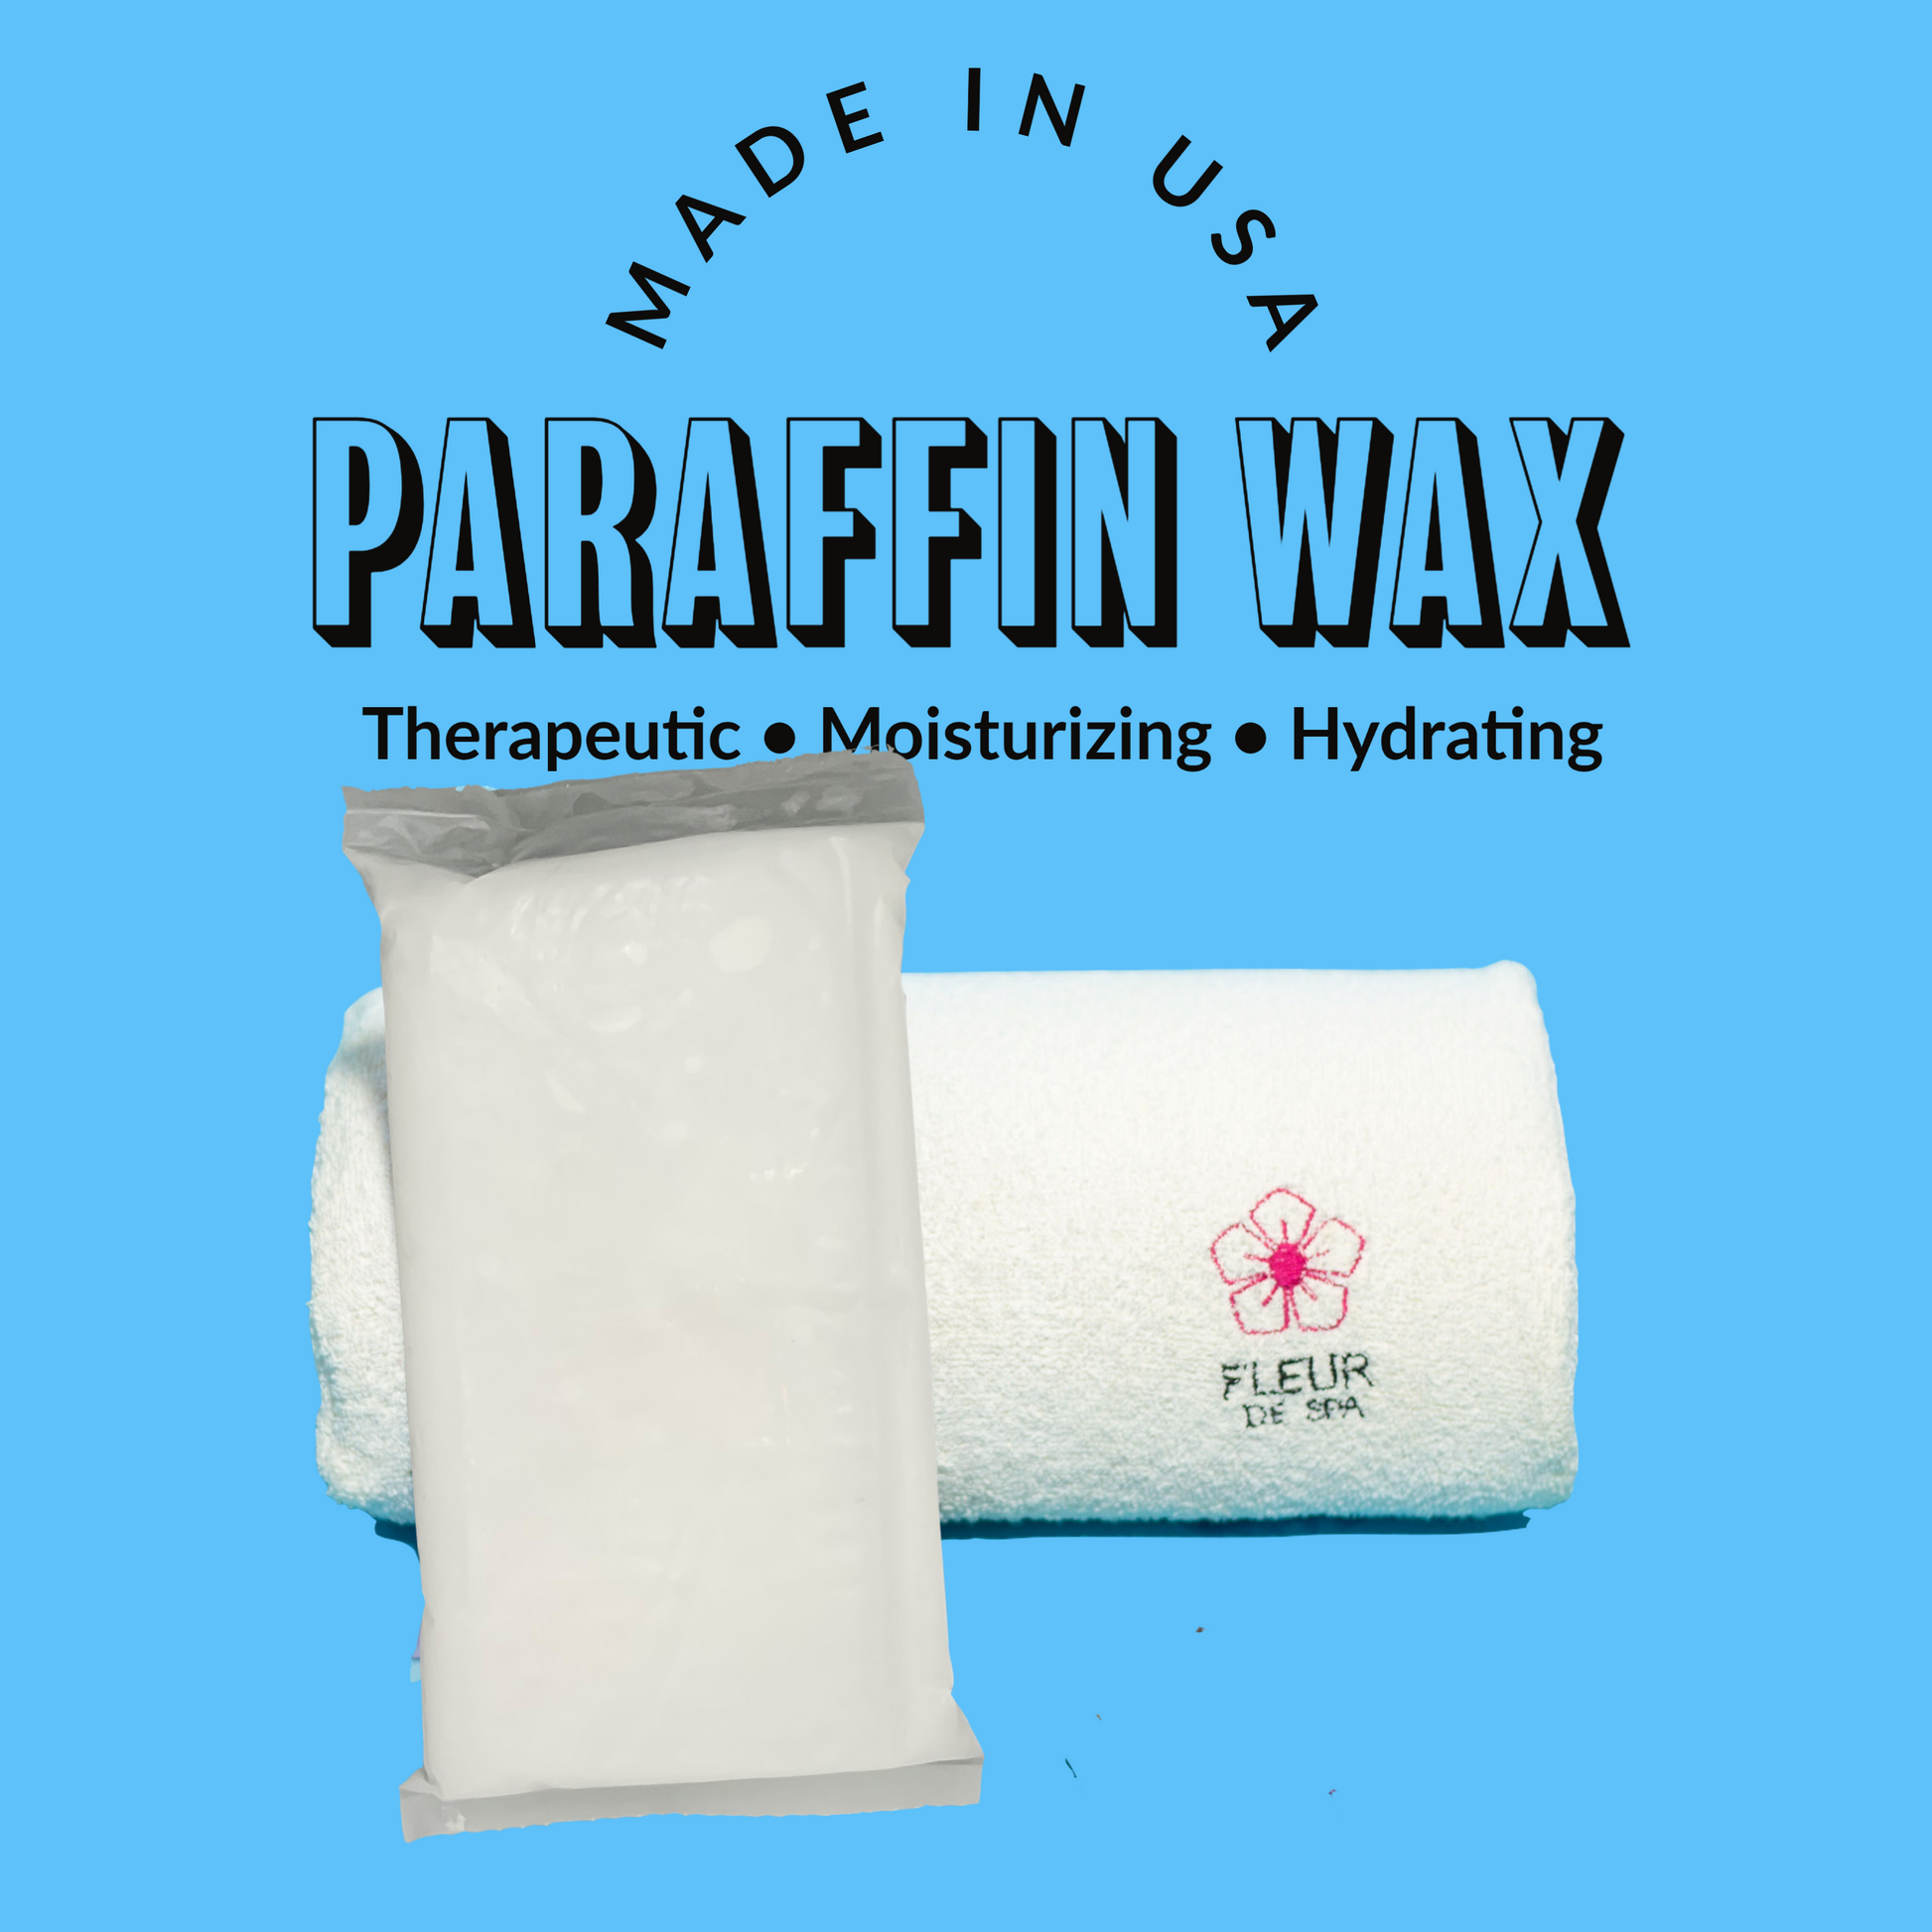 Paraffin Wax refill 6lbs made in USA Fleur De Spa for Hands and Feet